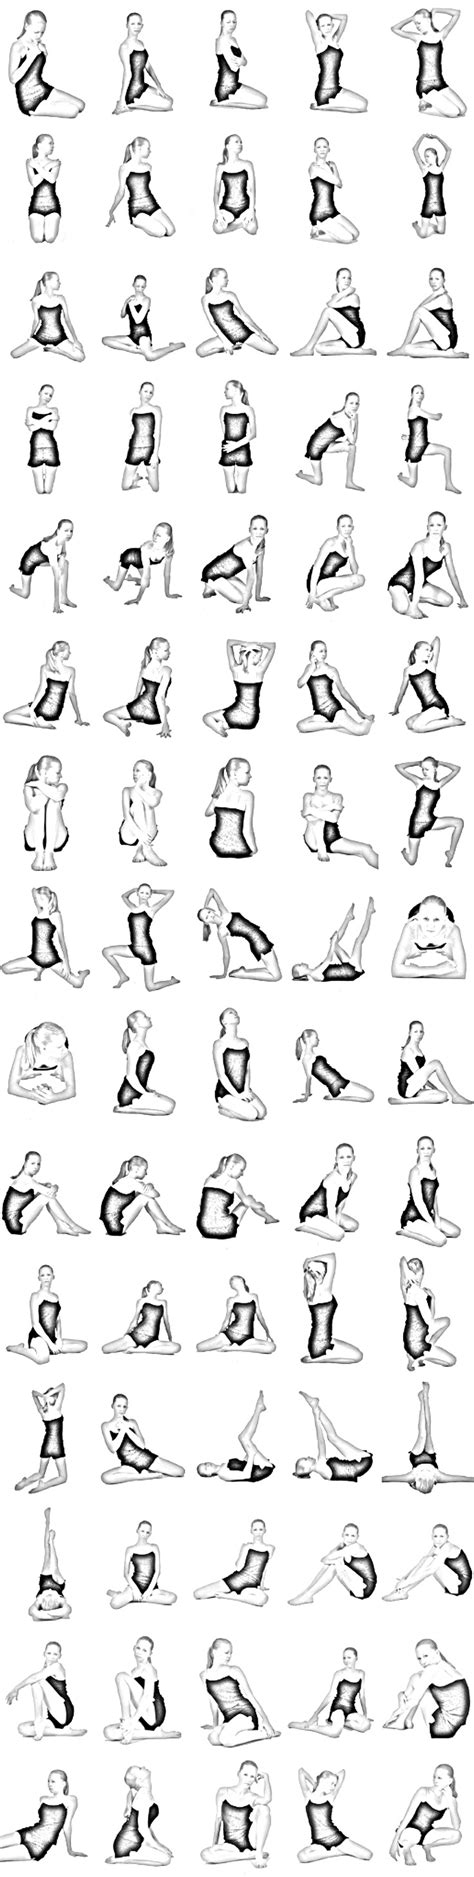 pin up poses haha this is awesome for someone who doesn t know how